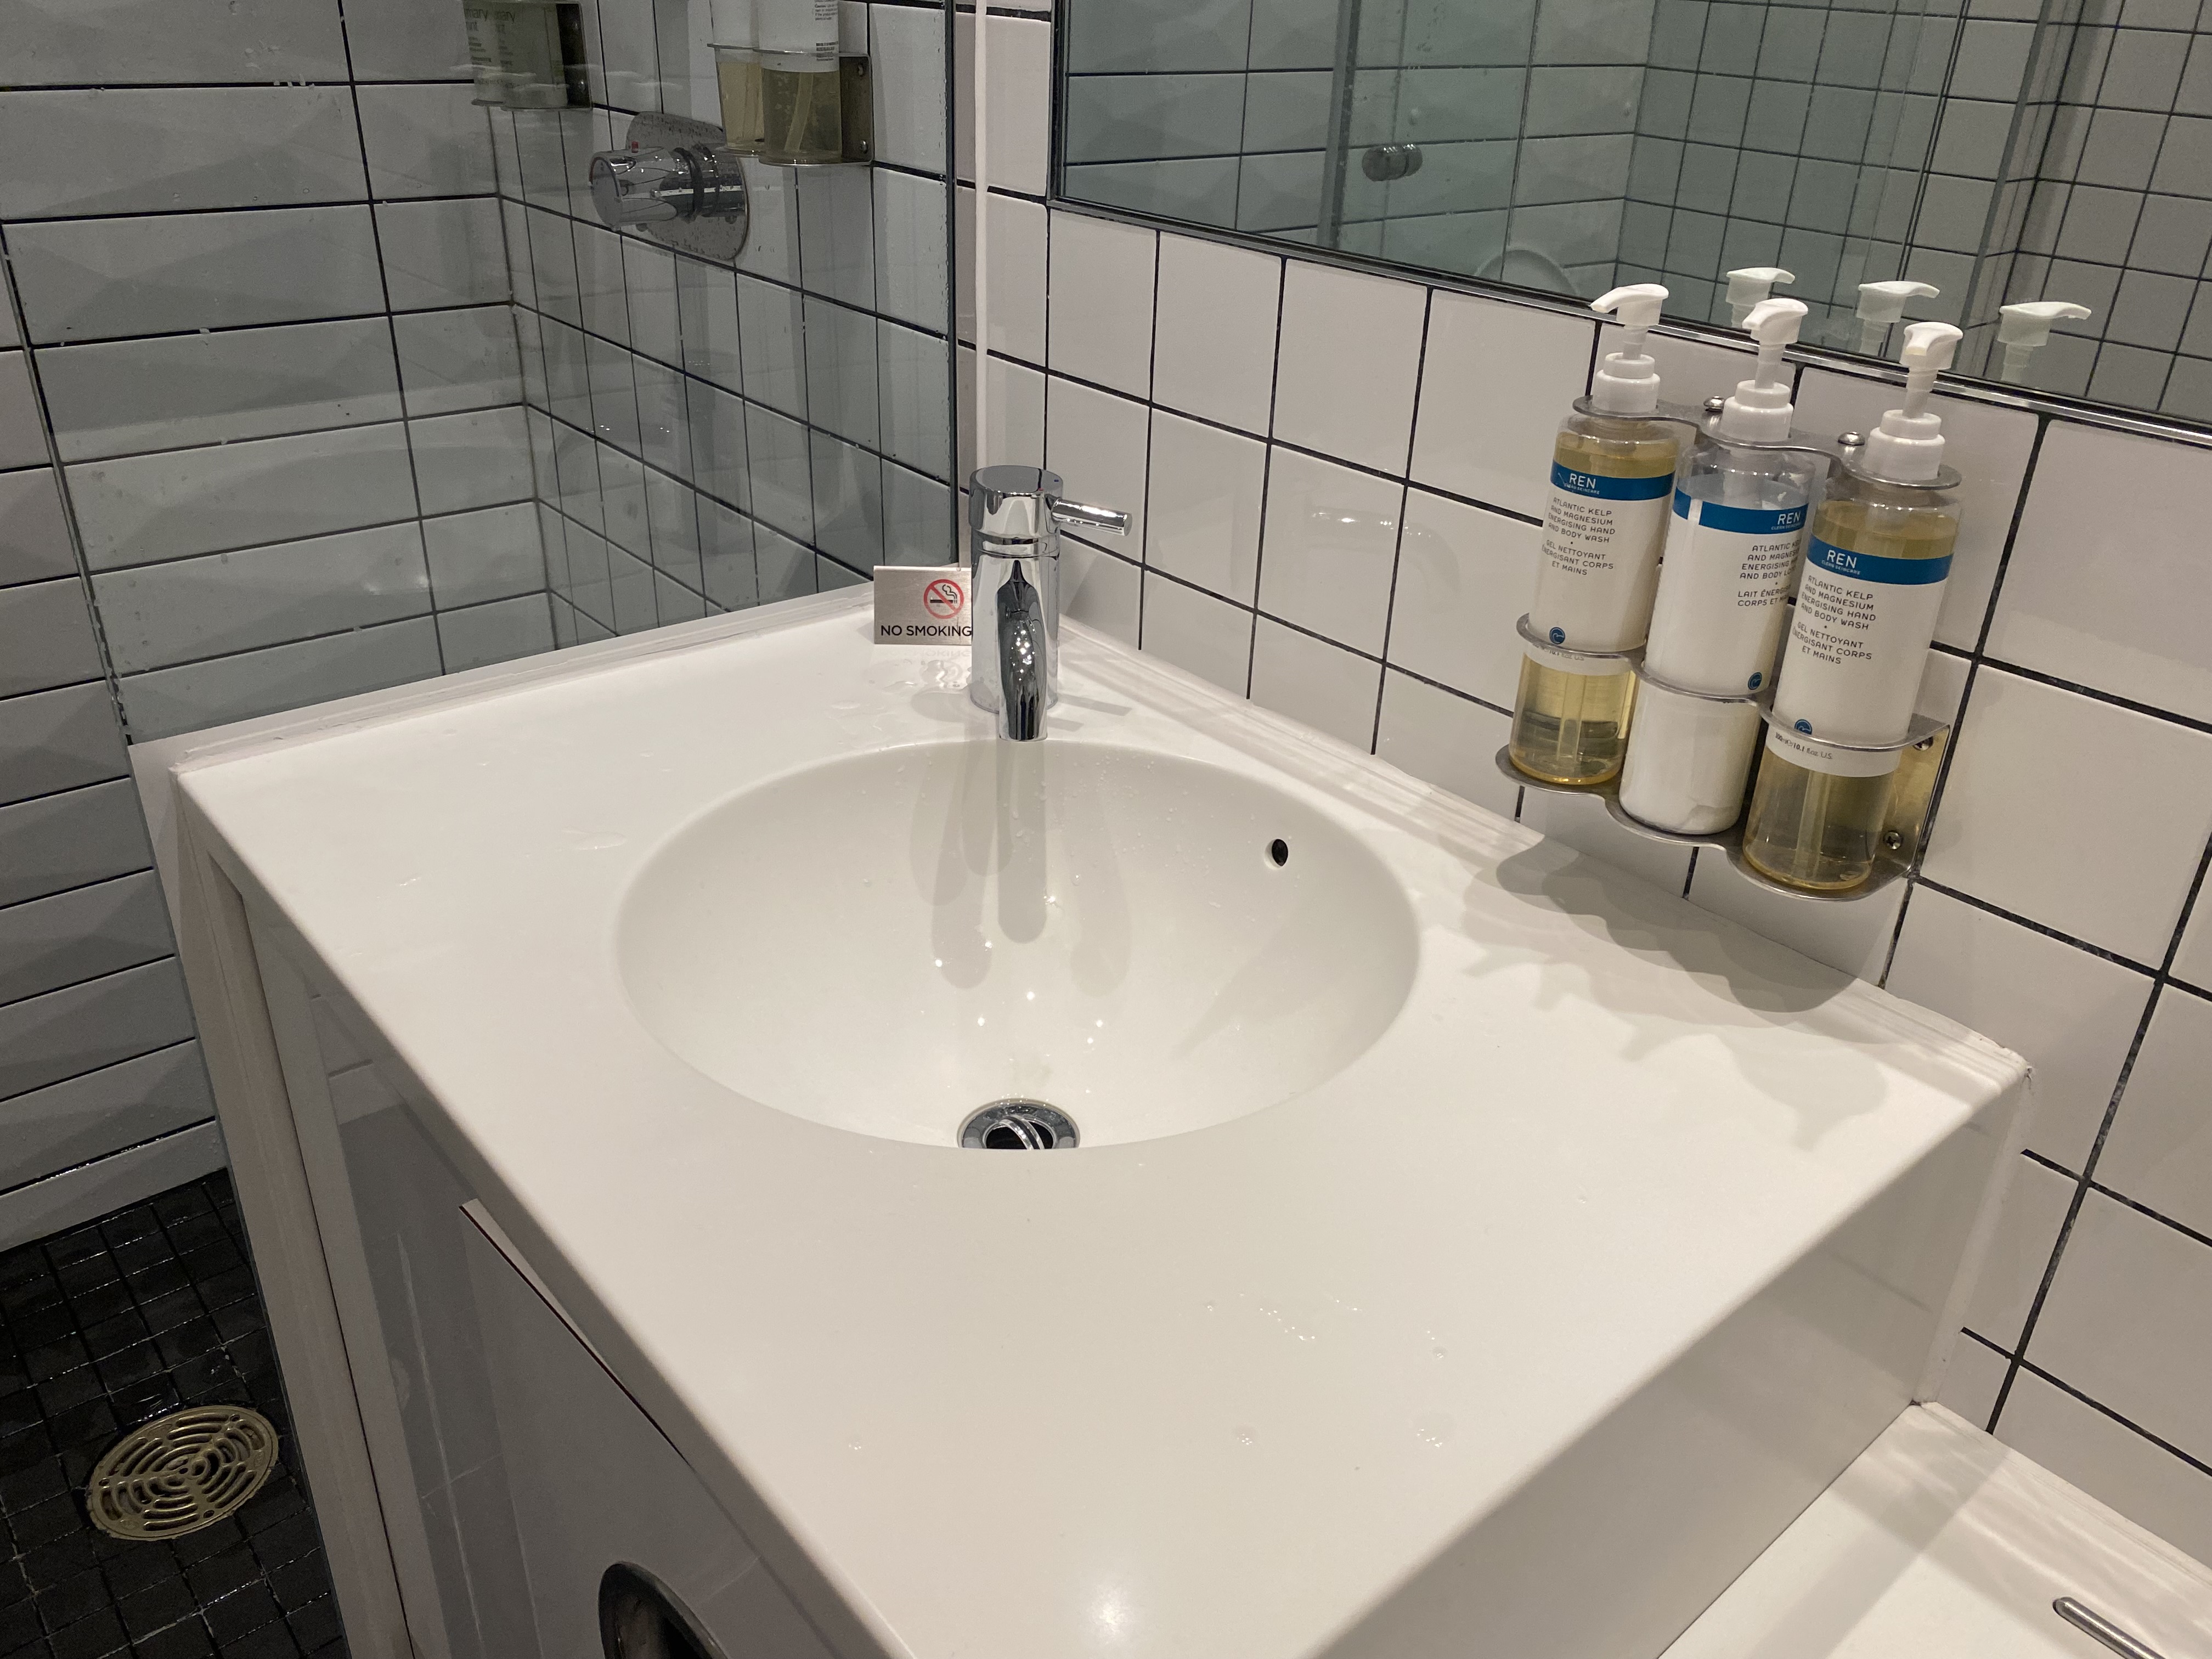 a sink with soap dispensers on the wall